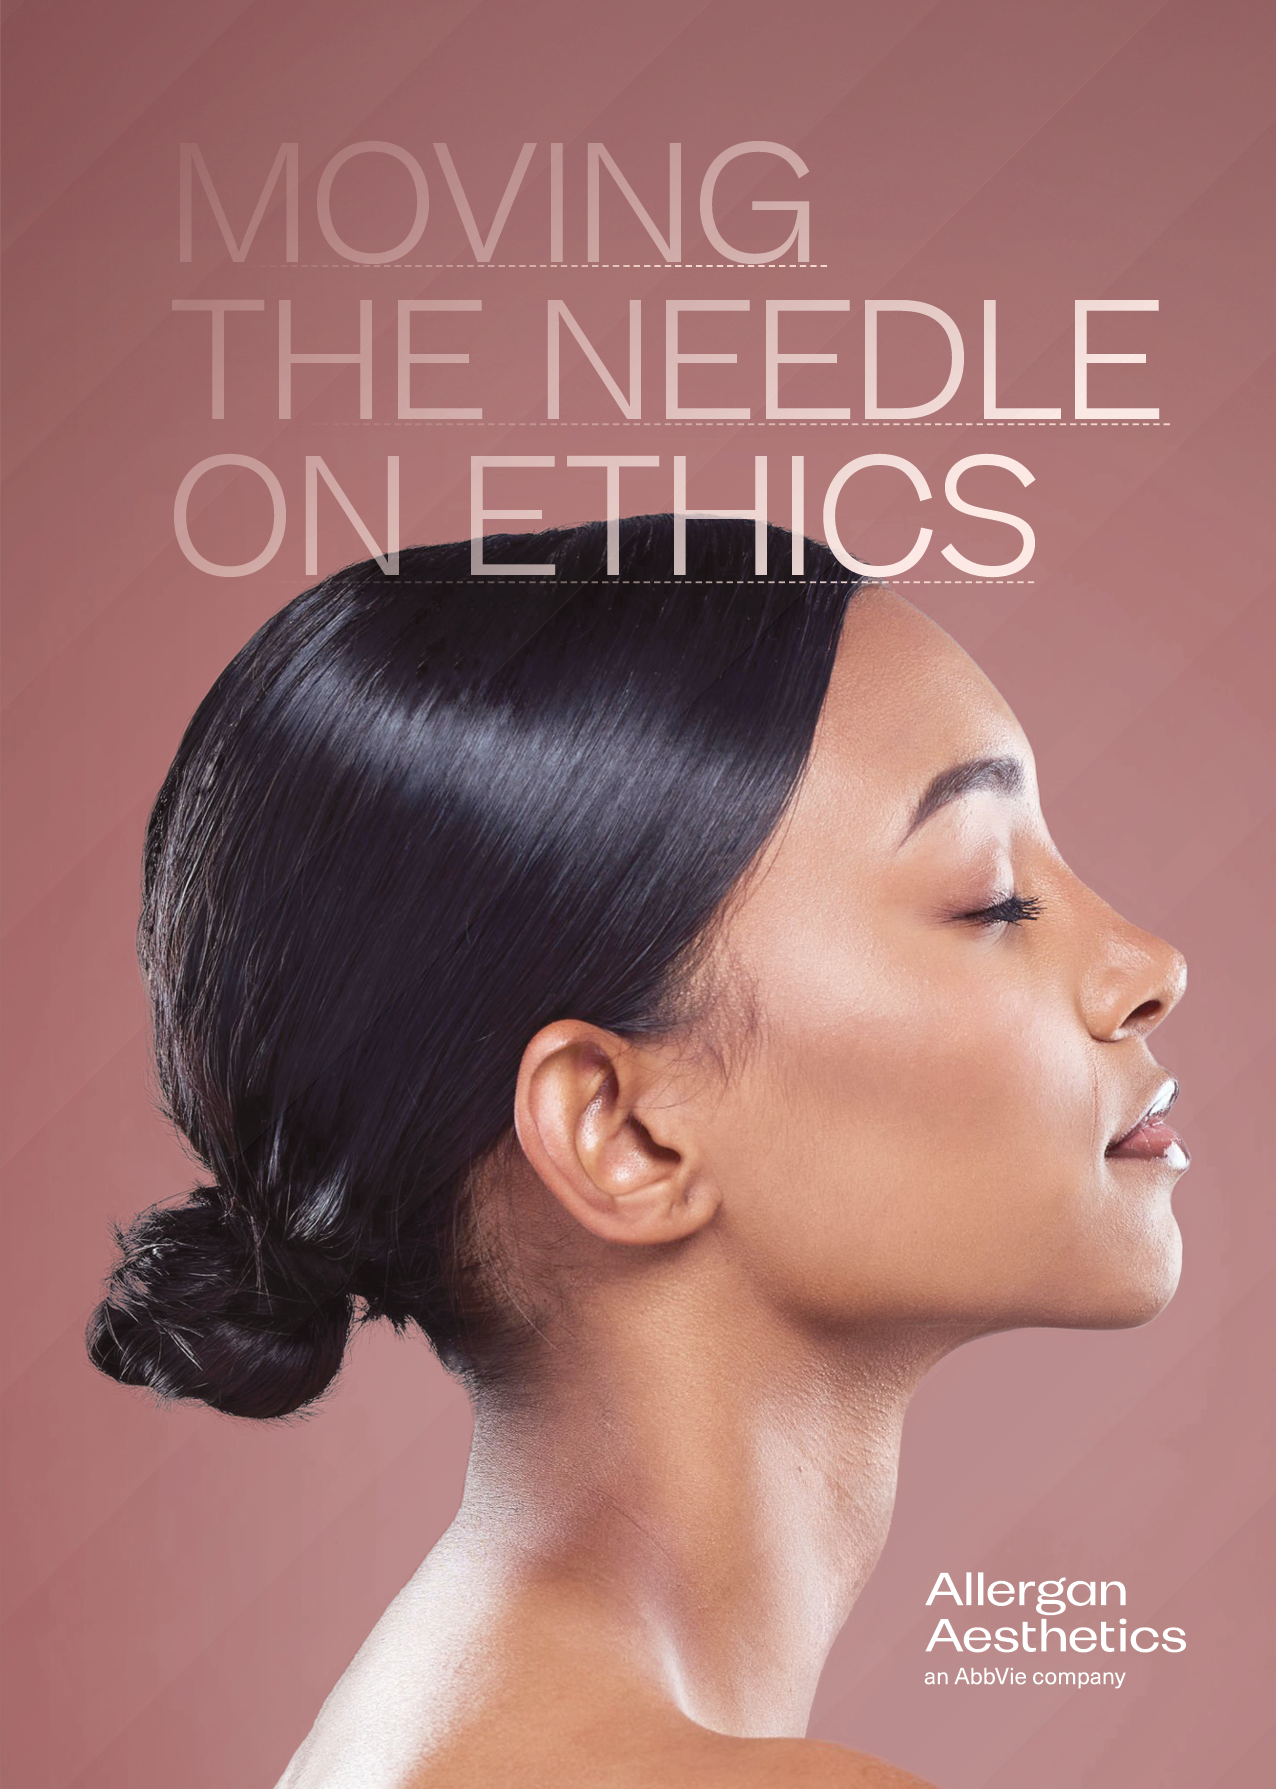 Allergan launches “Moving the Needle on Ethics” book